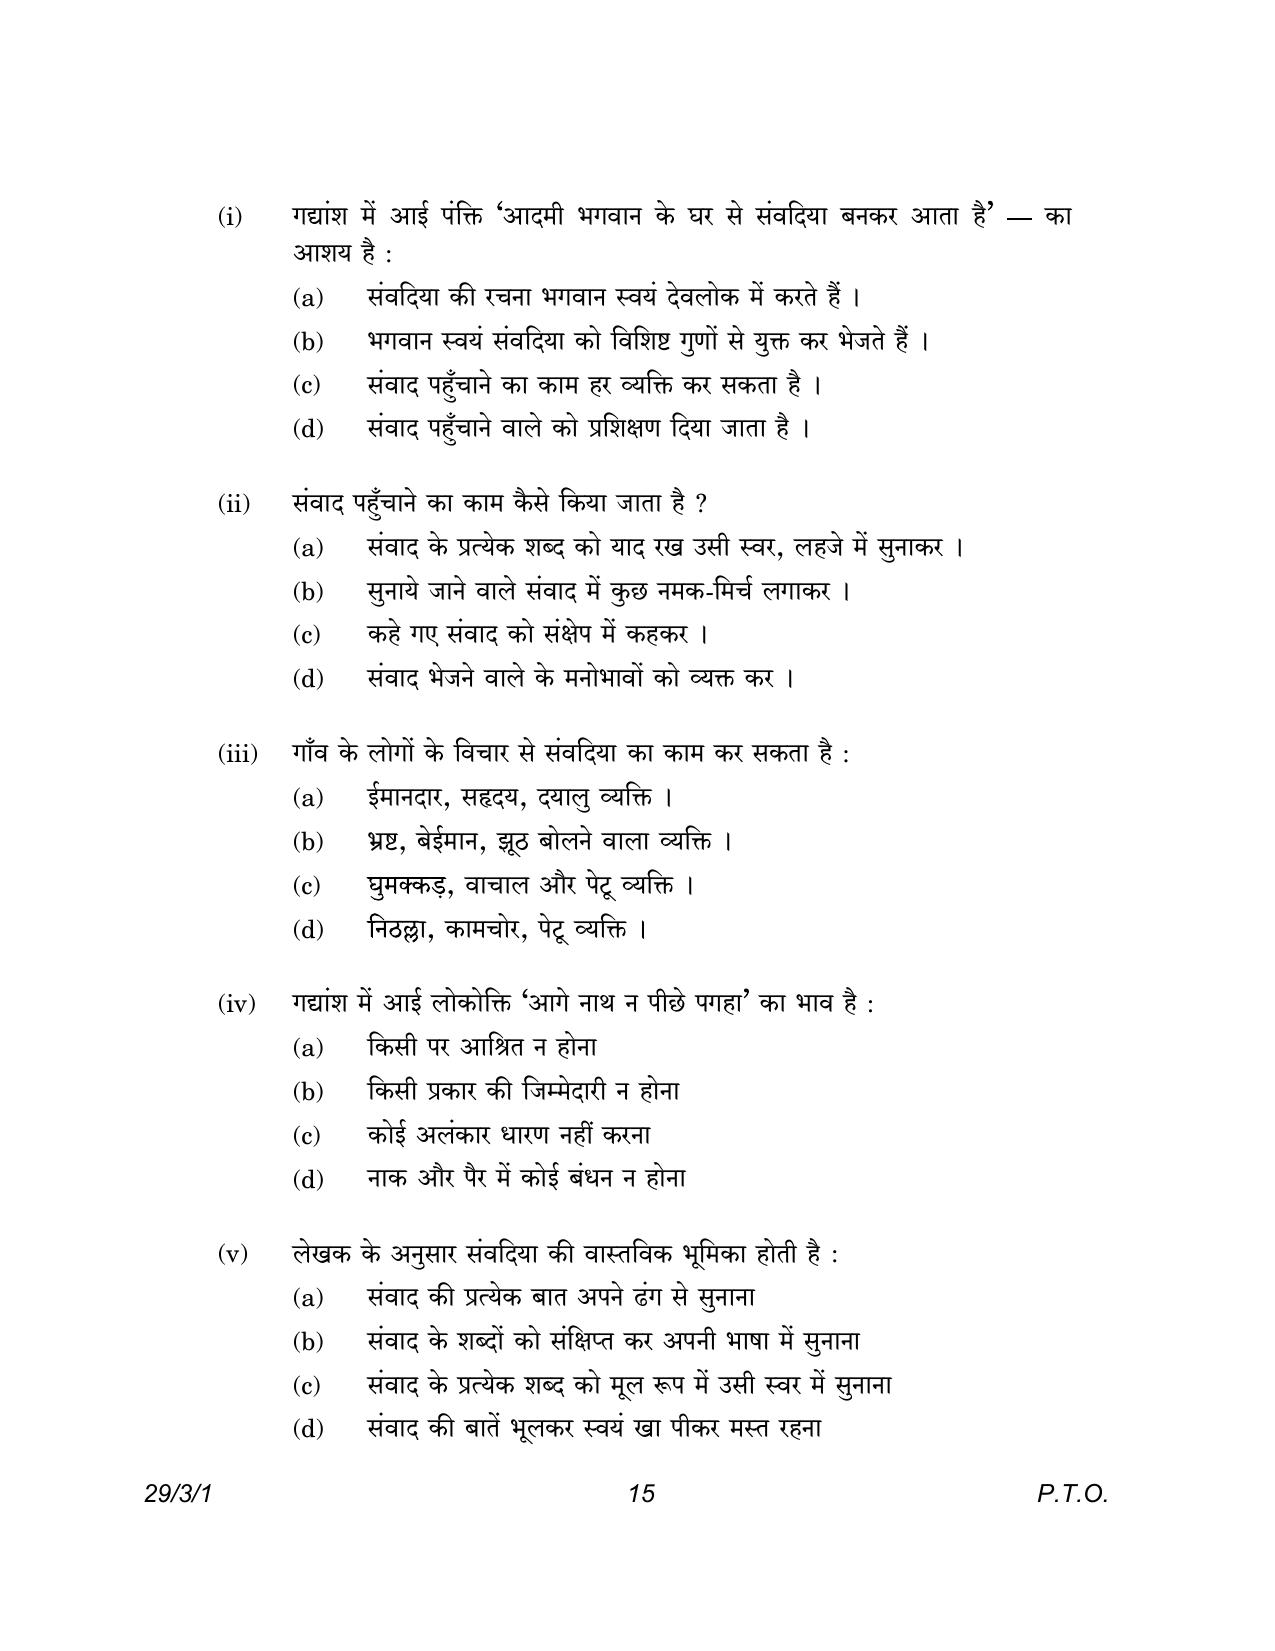 CBSE Class 12 29-3-1 Hindi Elective 2023 Question Paper - Page 15